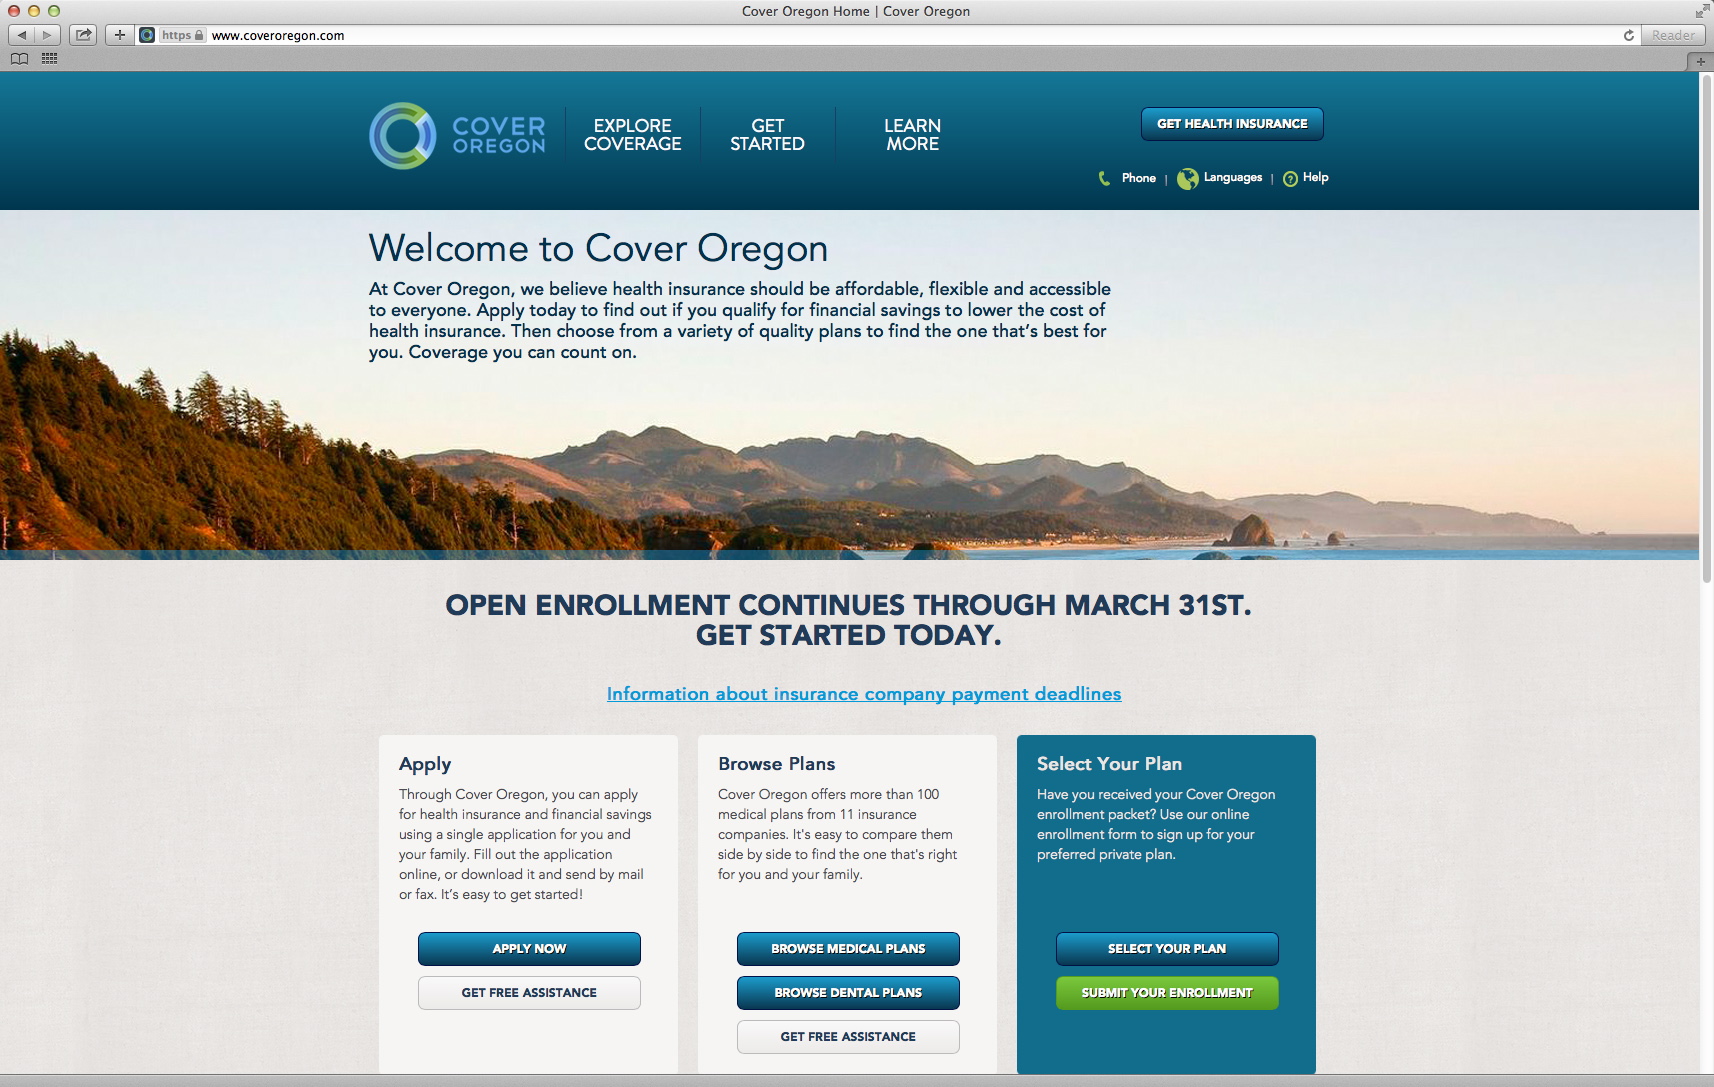 The website for Oregon's health care exchange, Cover Oregon